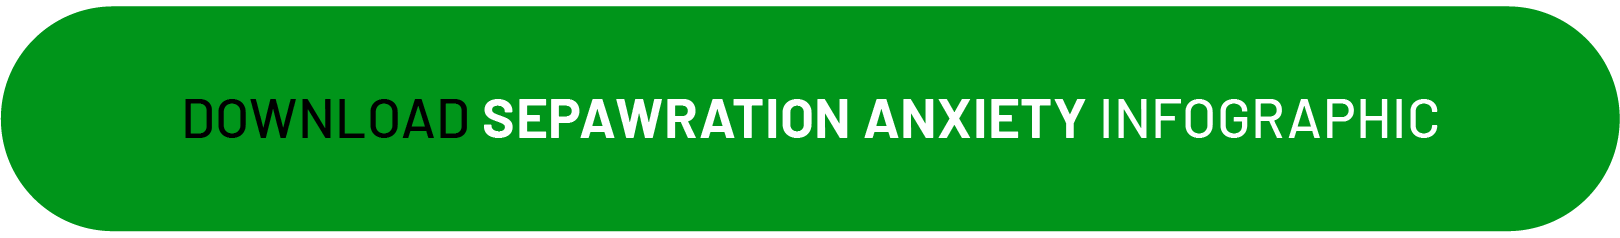 Green download button that reads "Download Sepawration Anxiety Infographic"